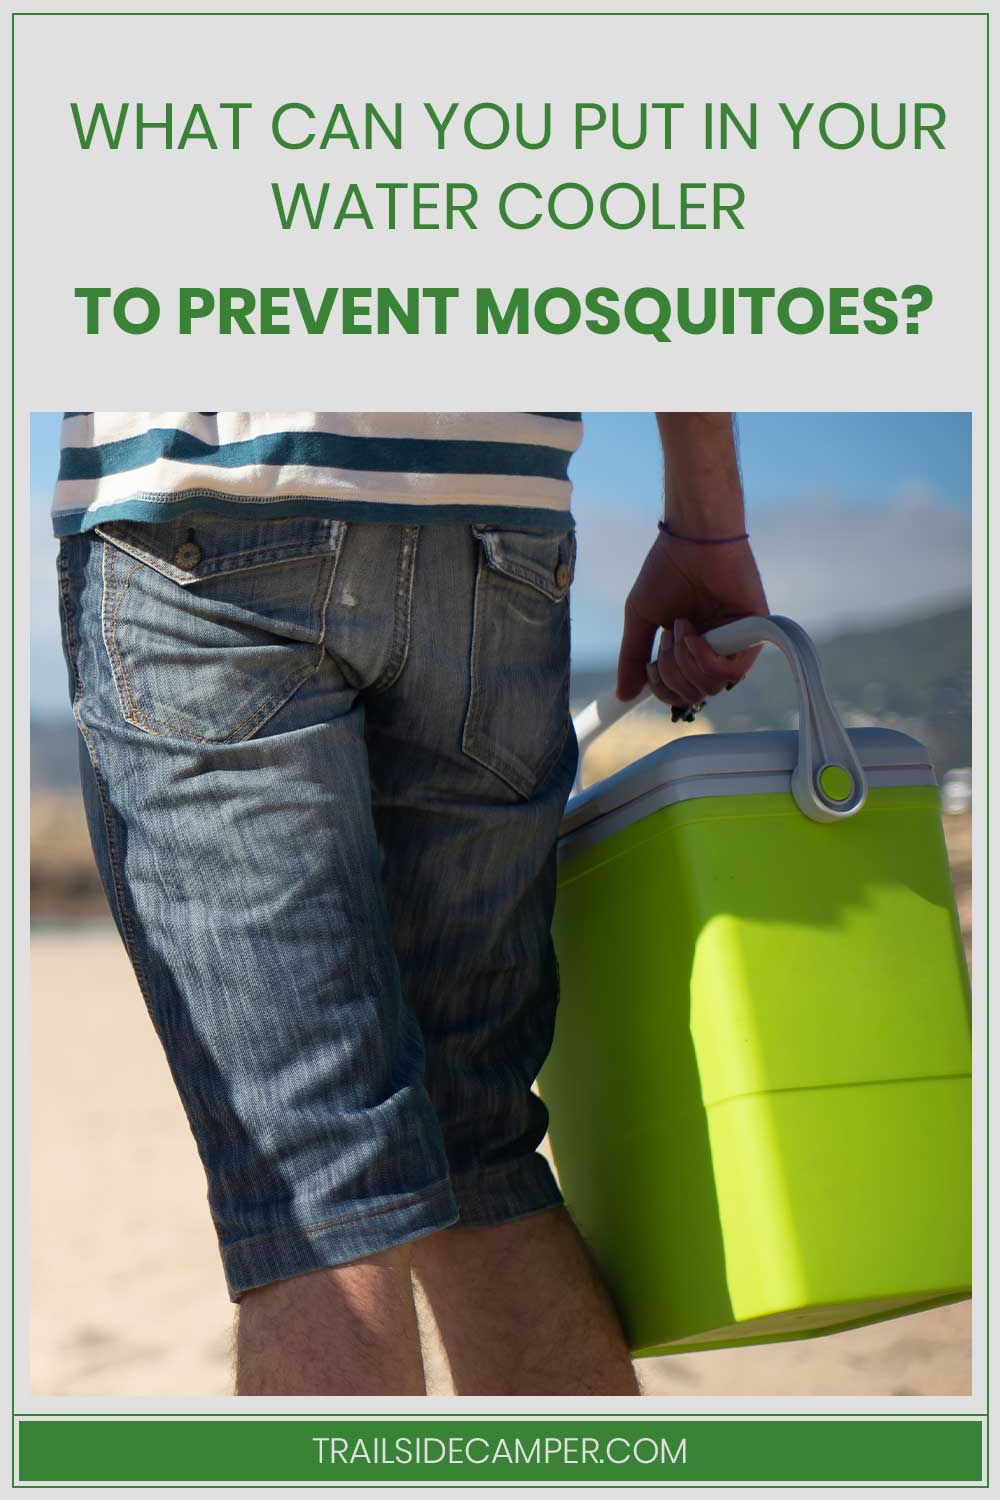 What Can You Put in Your Water Cooler to Prevent Mosquitoes?